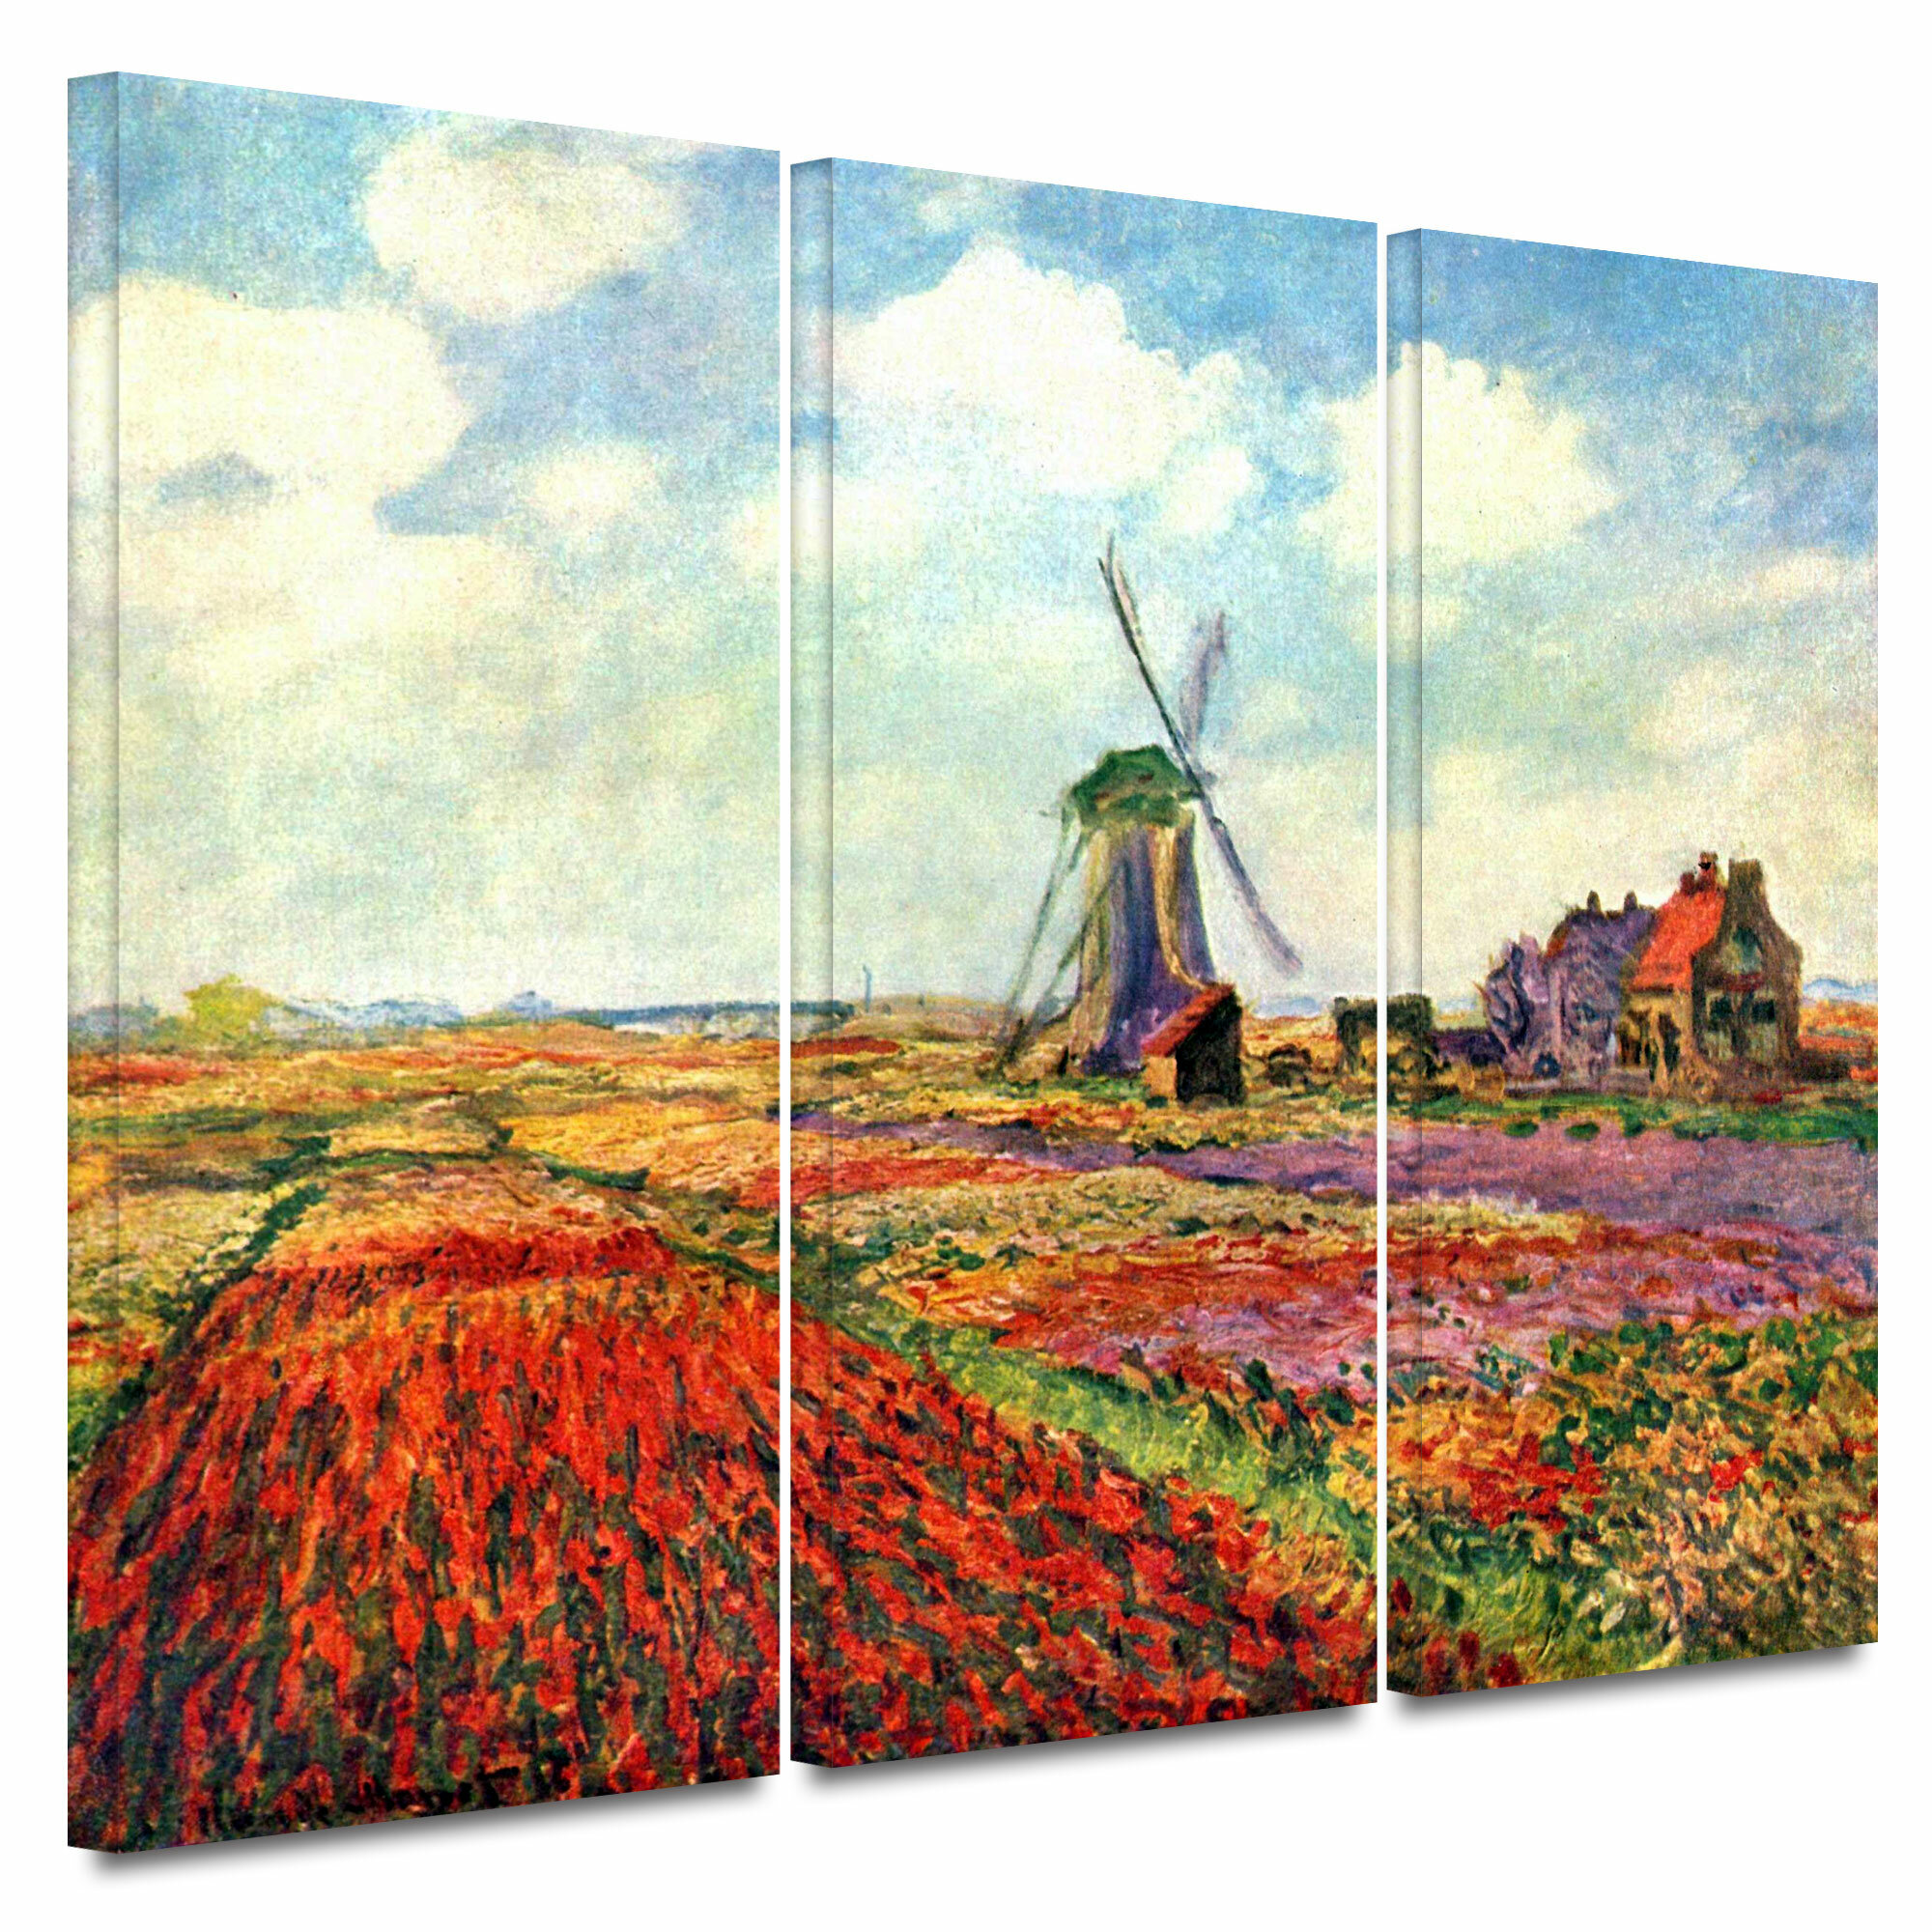 ArtWall 'Windmill' by Claude Monet 3 Piece Painting Print on Wrapped ...